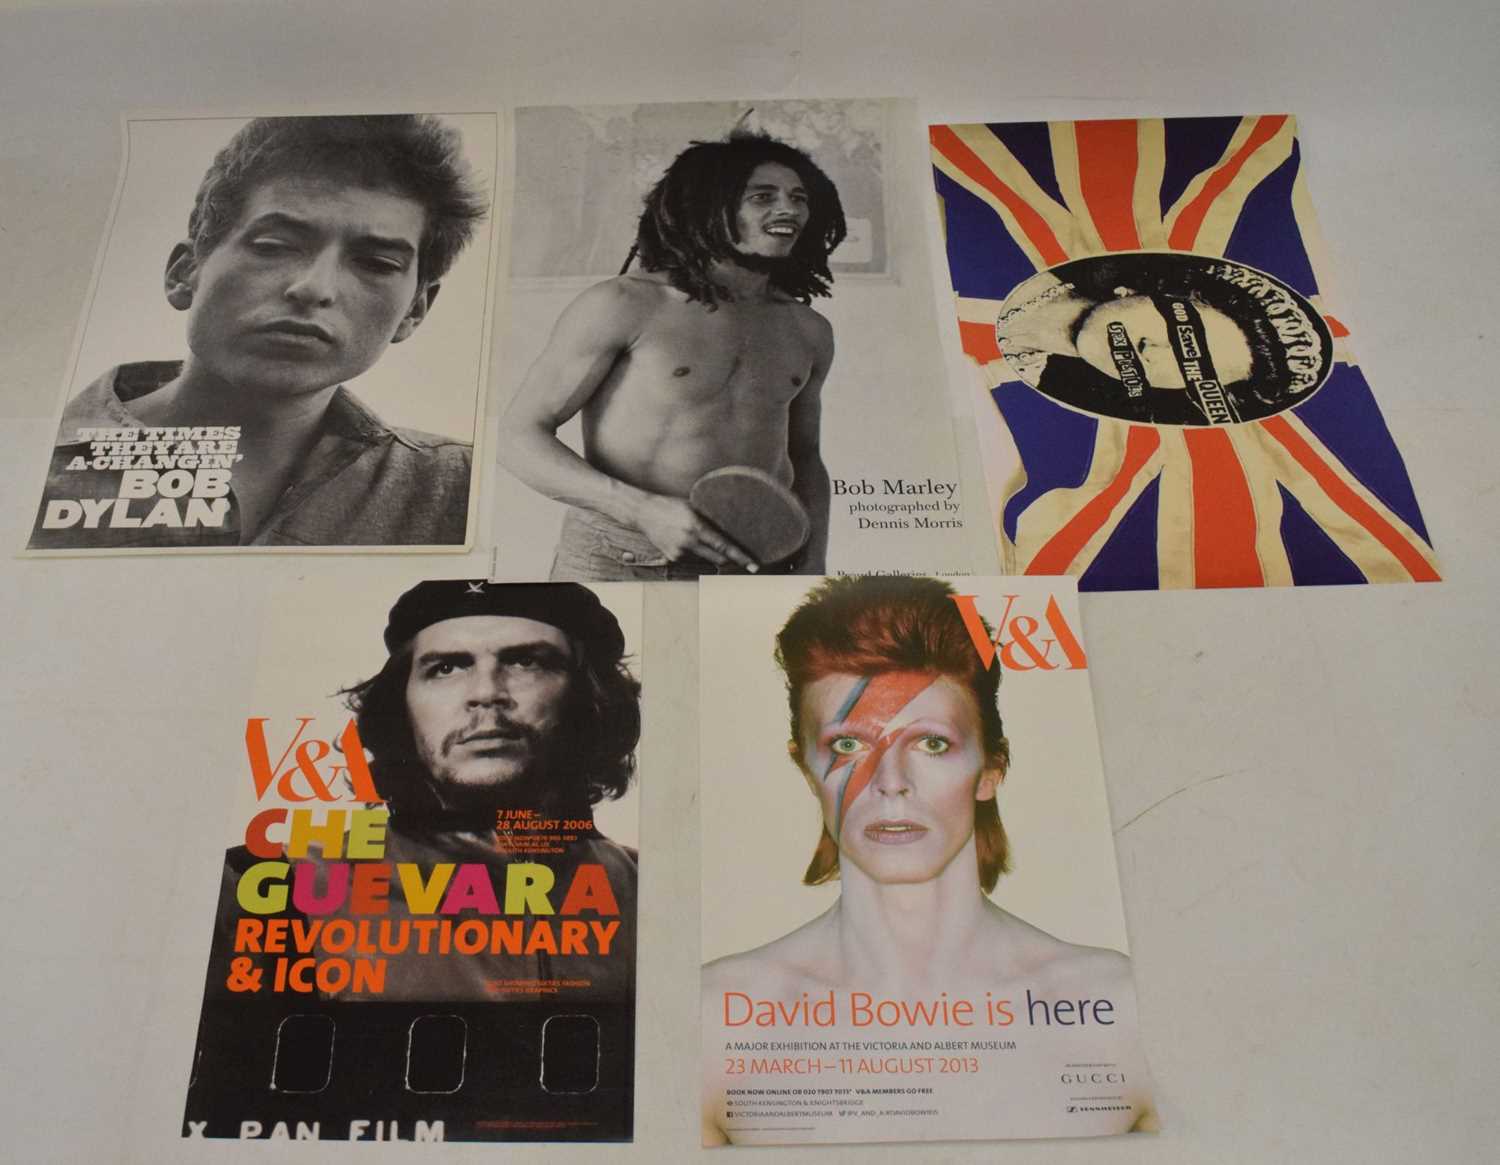 V&A MUSEUM David Bowie is here ポスター www.krzysztofbialy.com